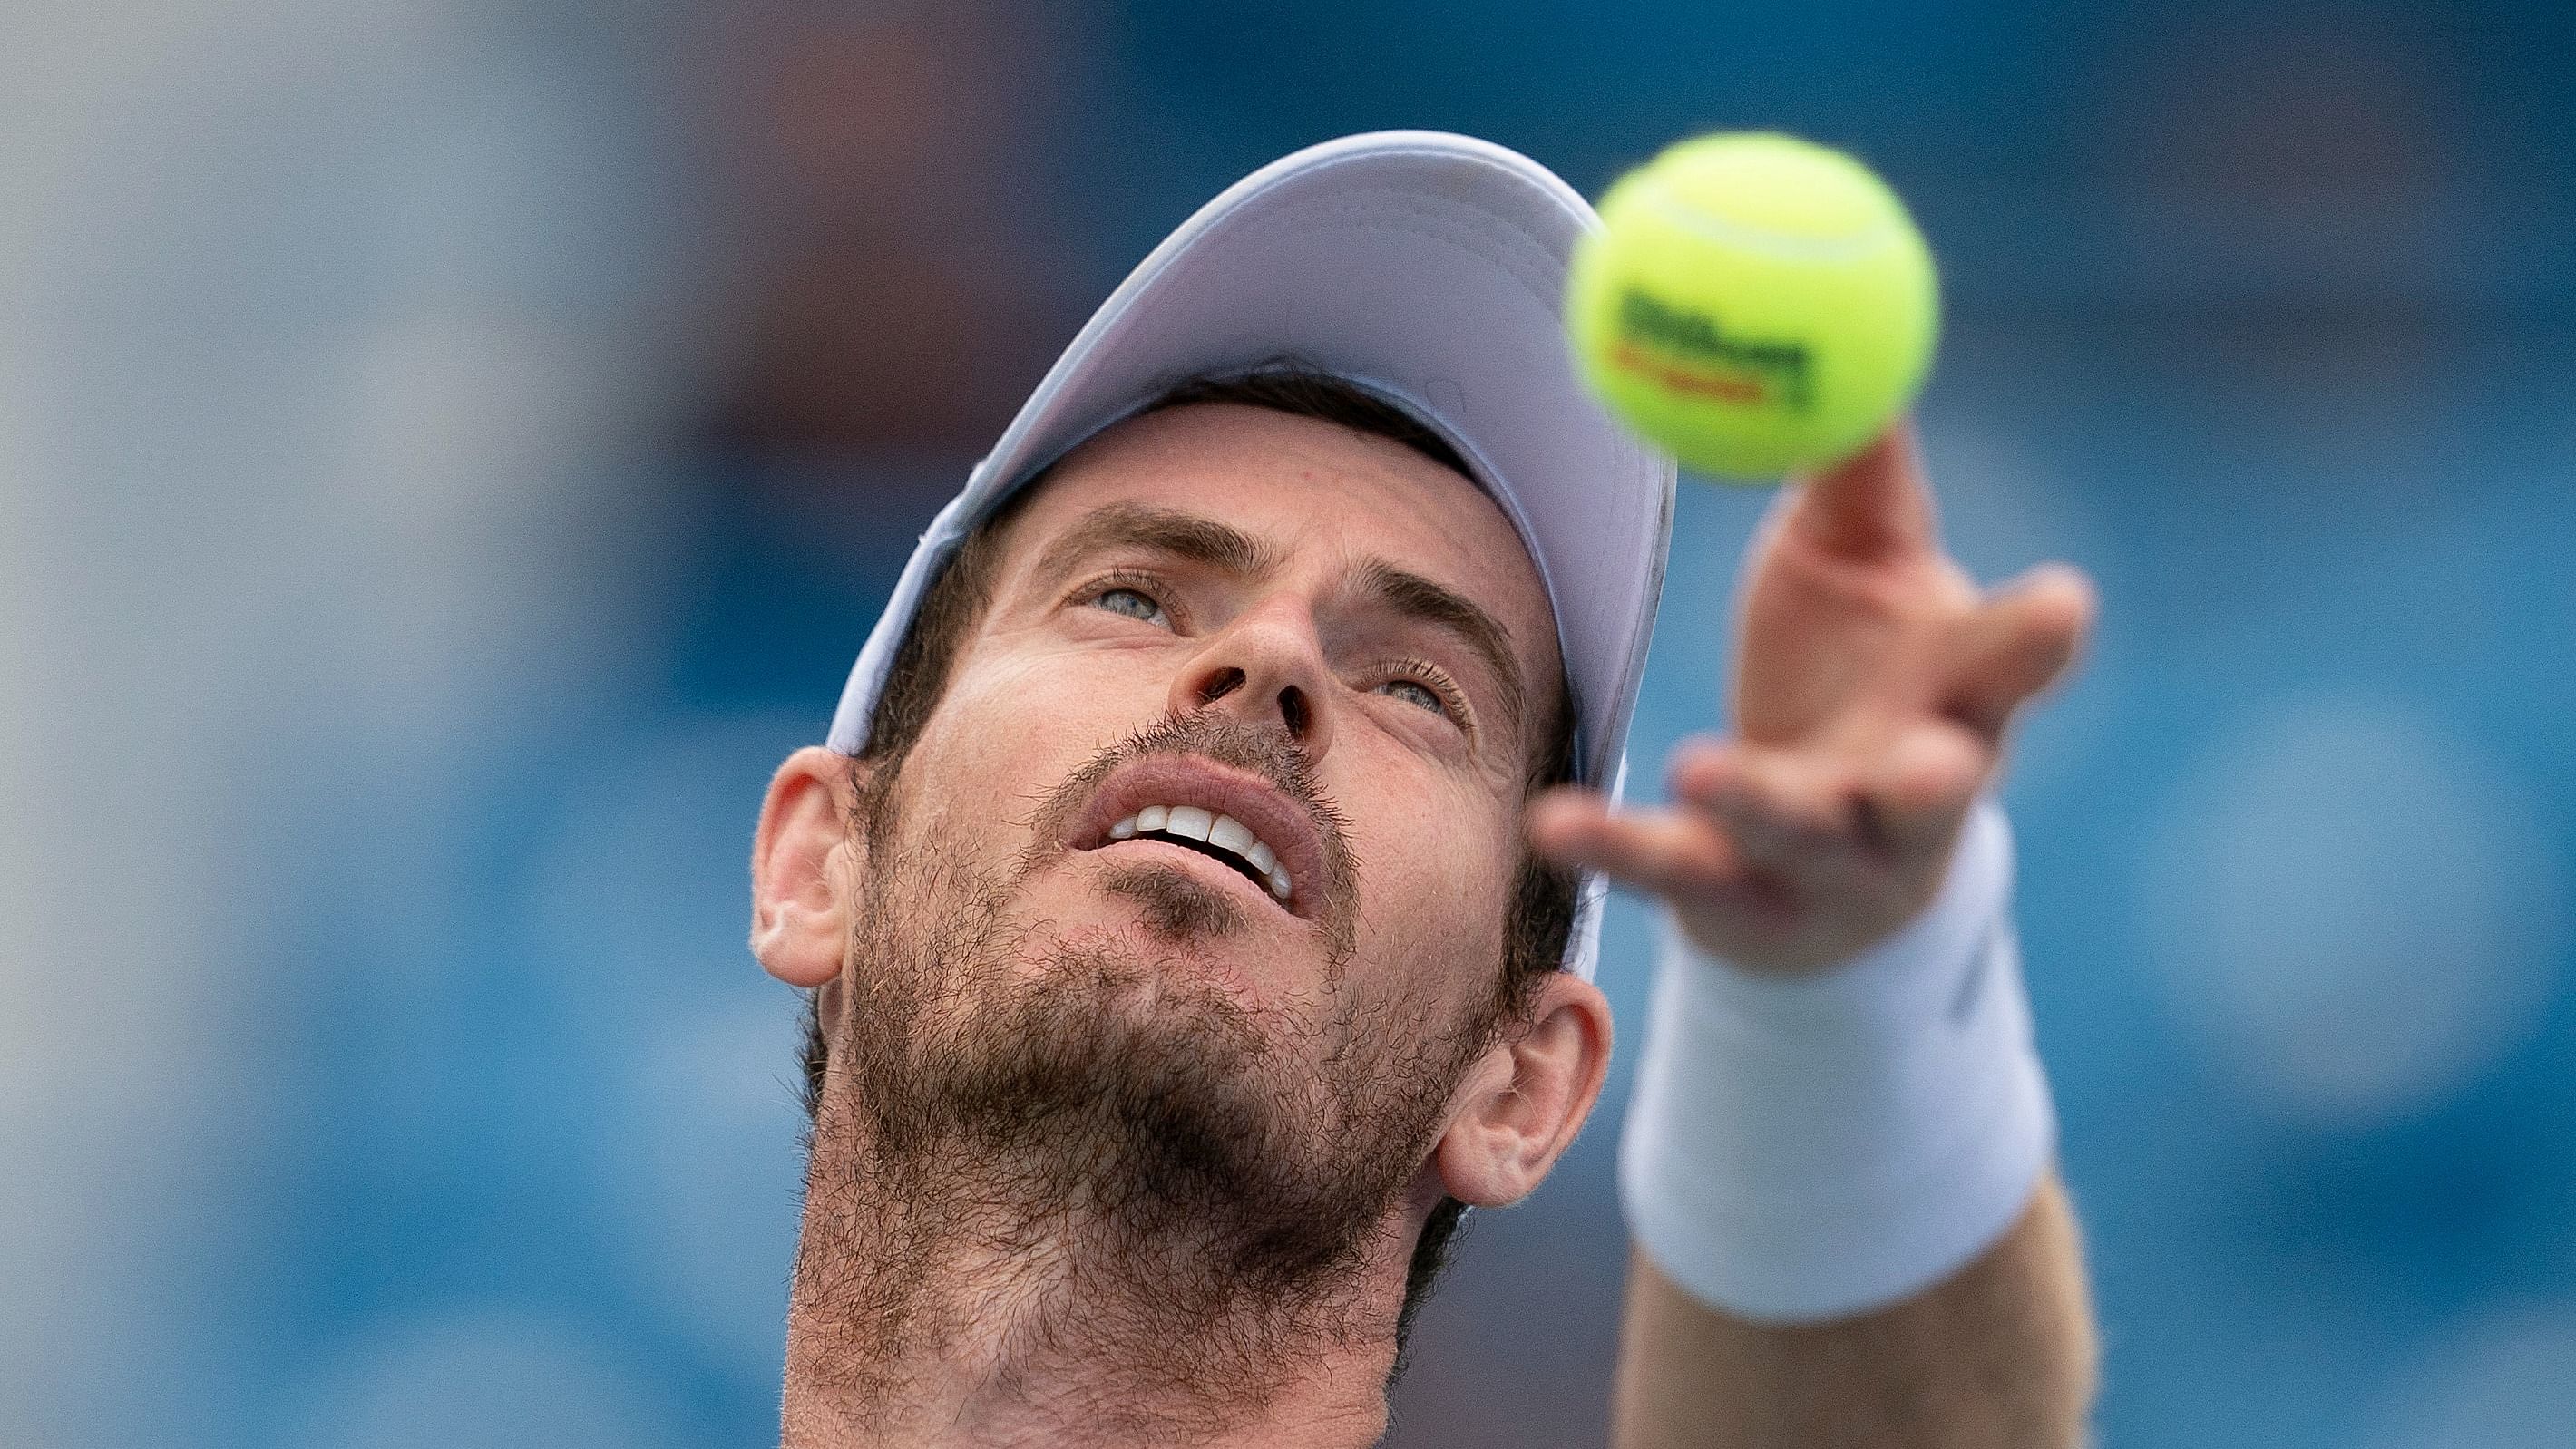 Andy Murray (GBR) tosses the ball to serve during his match against Stanislas Wawrinka (SUI) at the Western & Southern at the at the Lindner Family Tennis Center. Credit: USA Today Sports via Reuters 